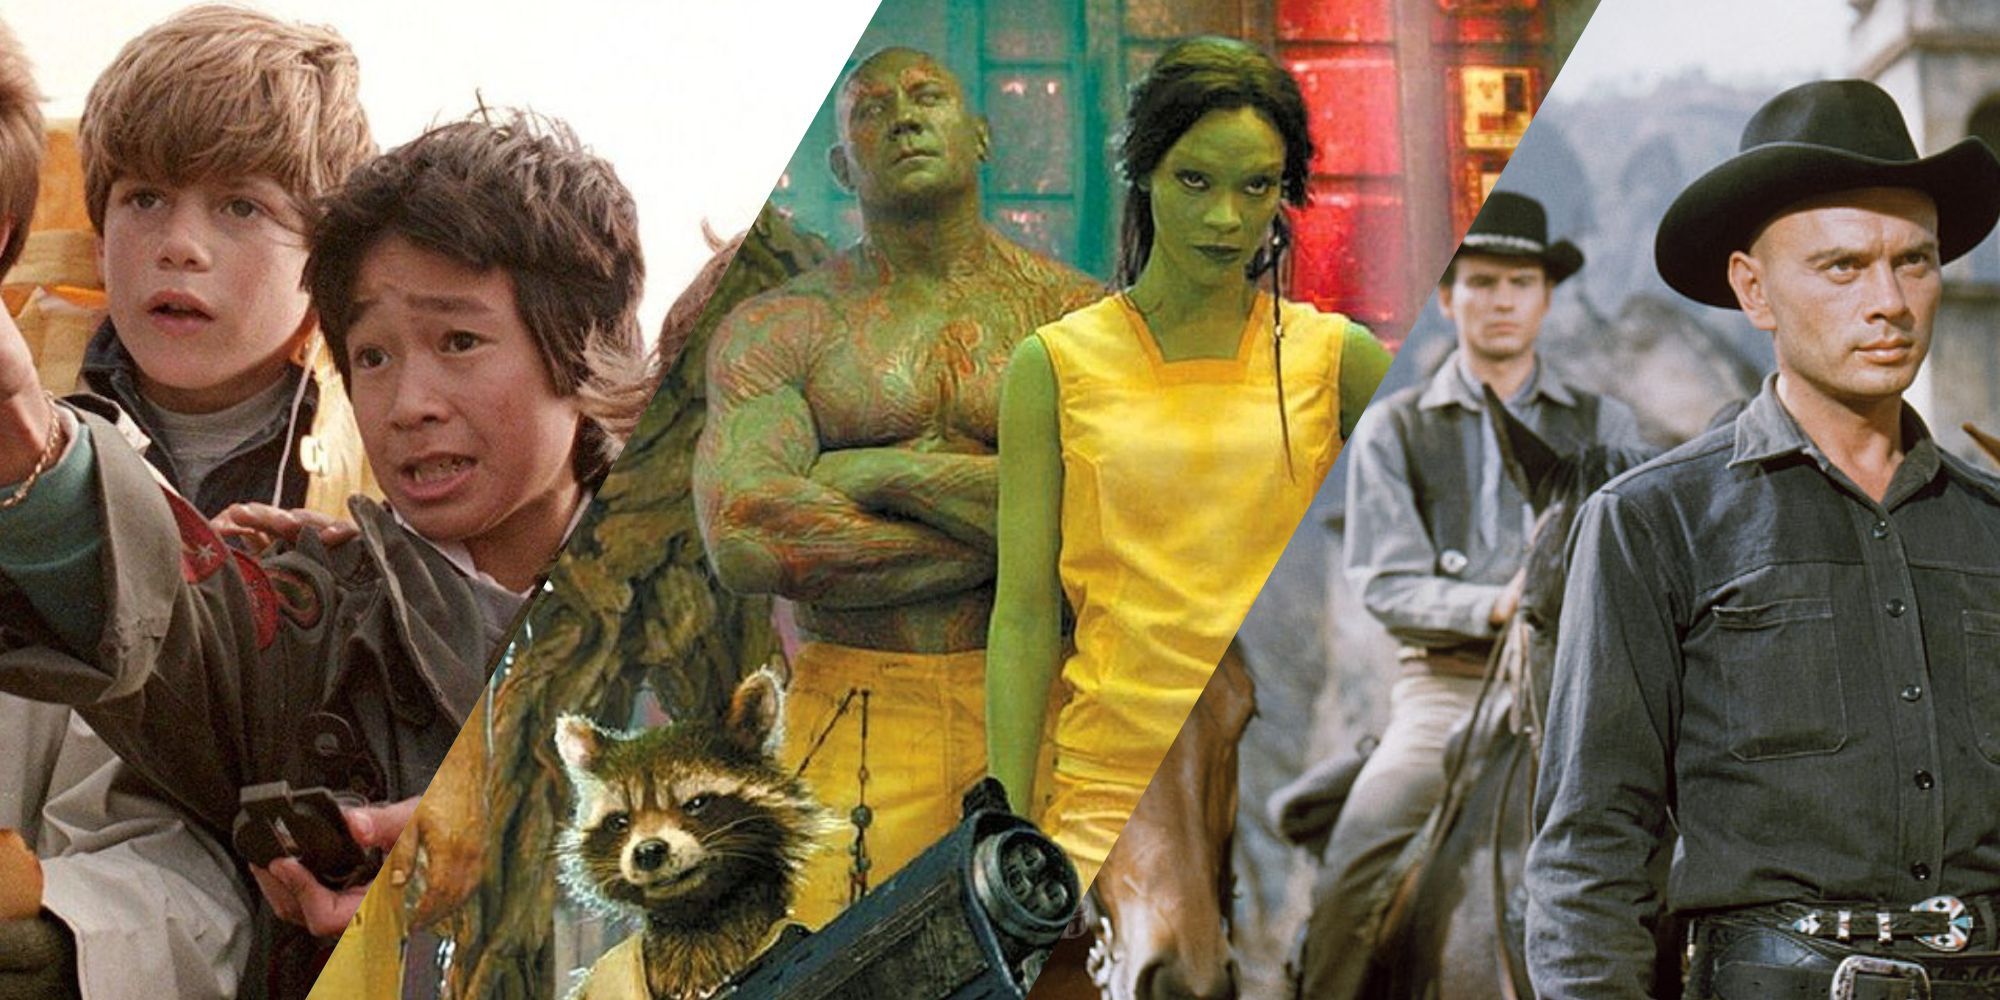 The Goonies, Guardians of the Galaxy and The Magnificent Seven